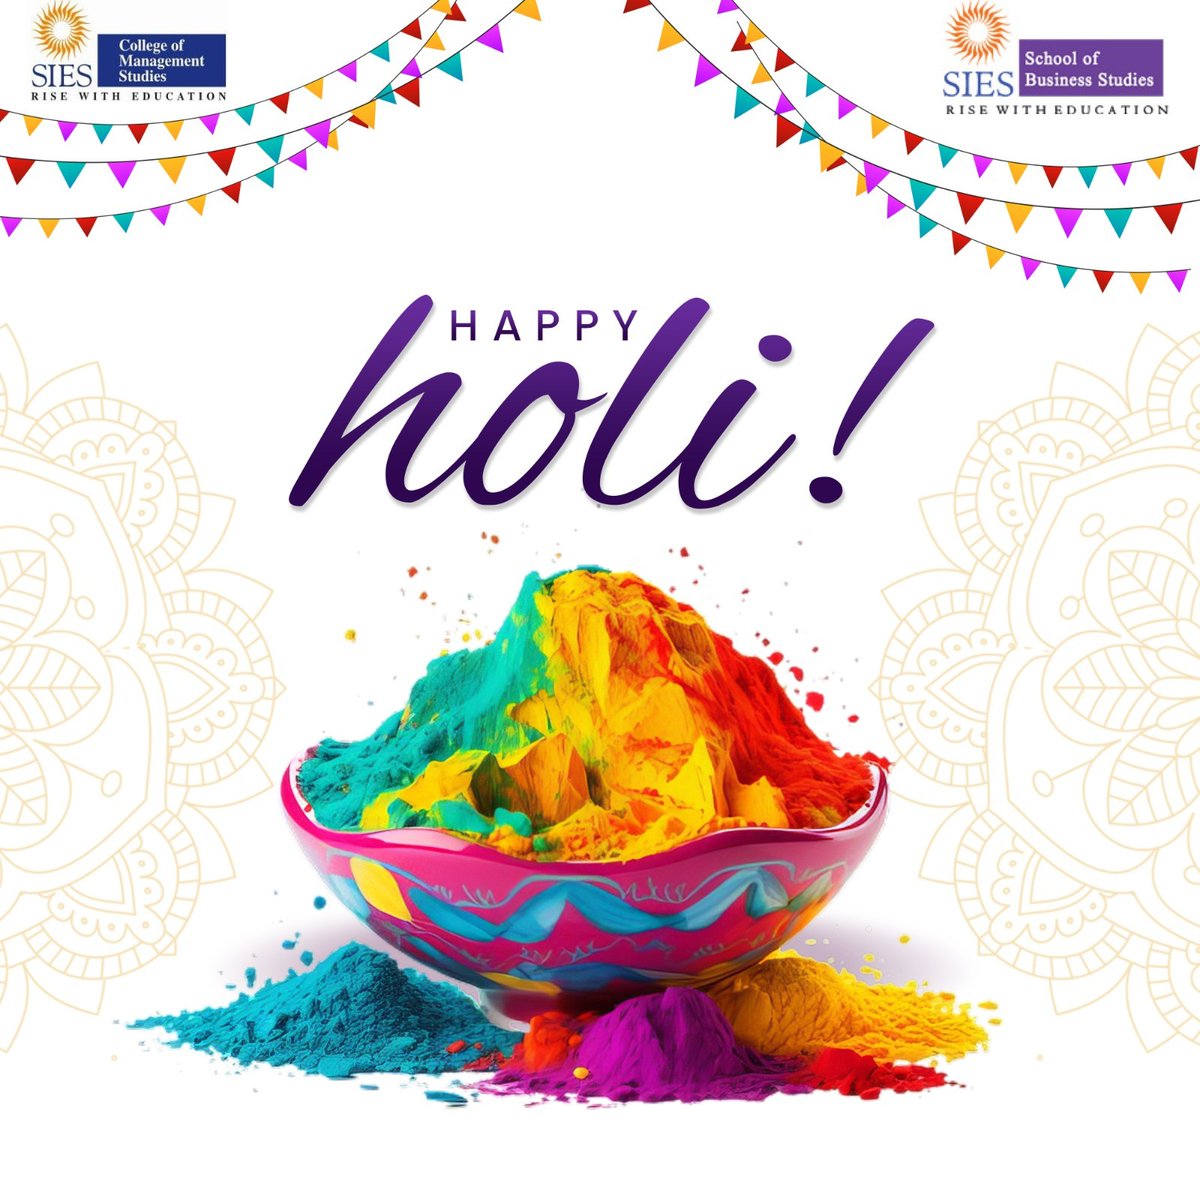 SIES Institutes extends heartfelt wishes for a joyful and a safe holi to all.